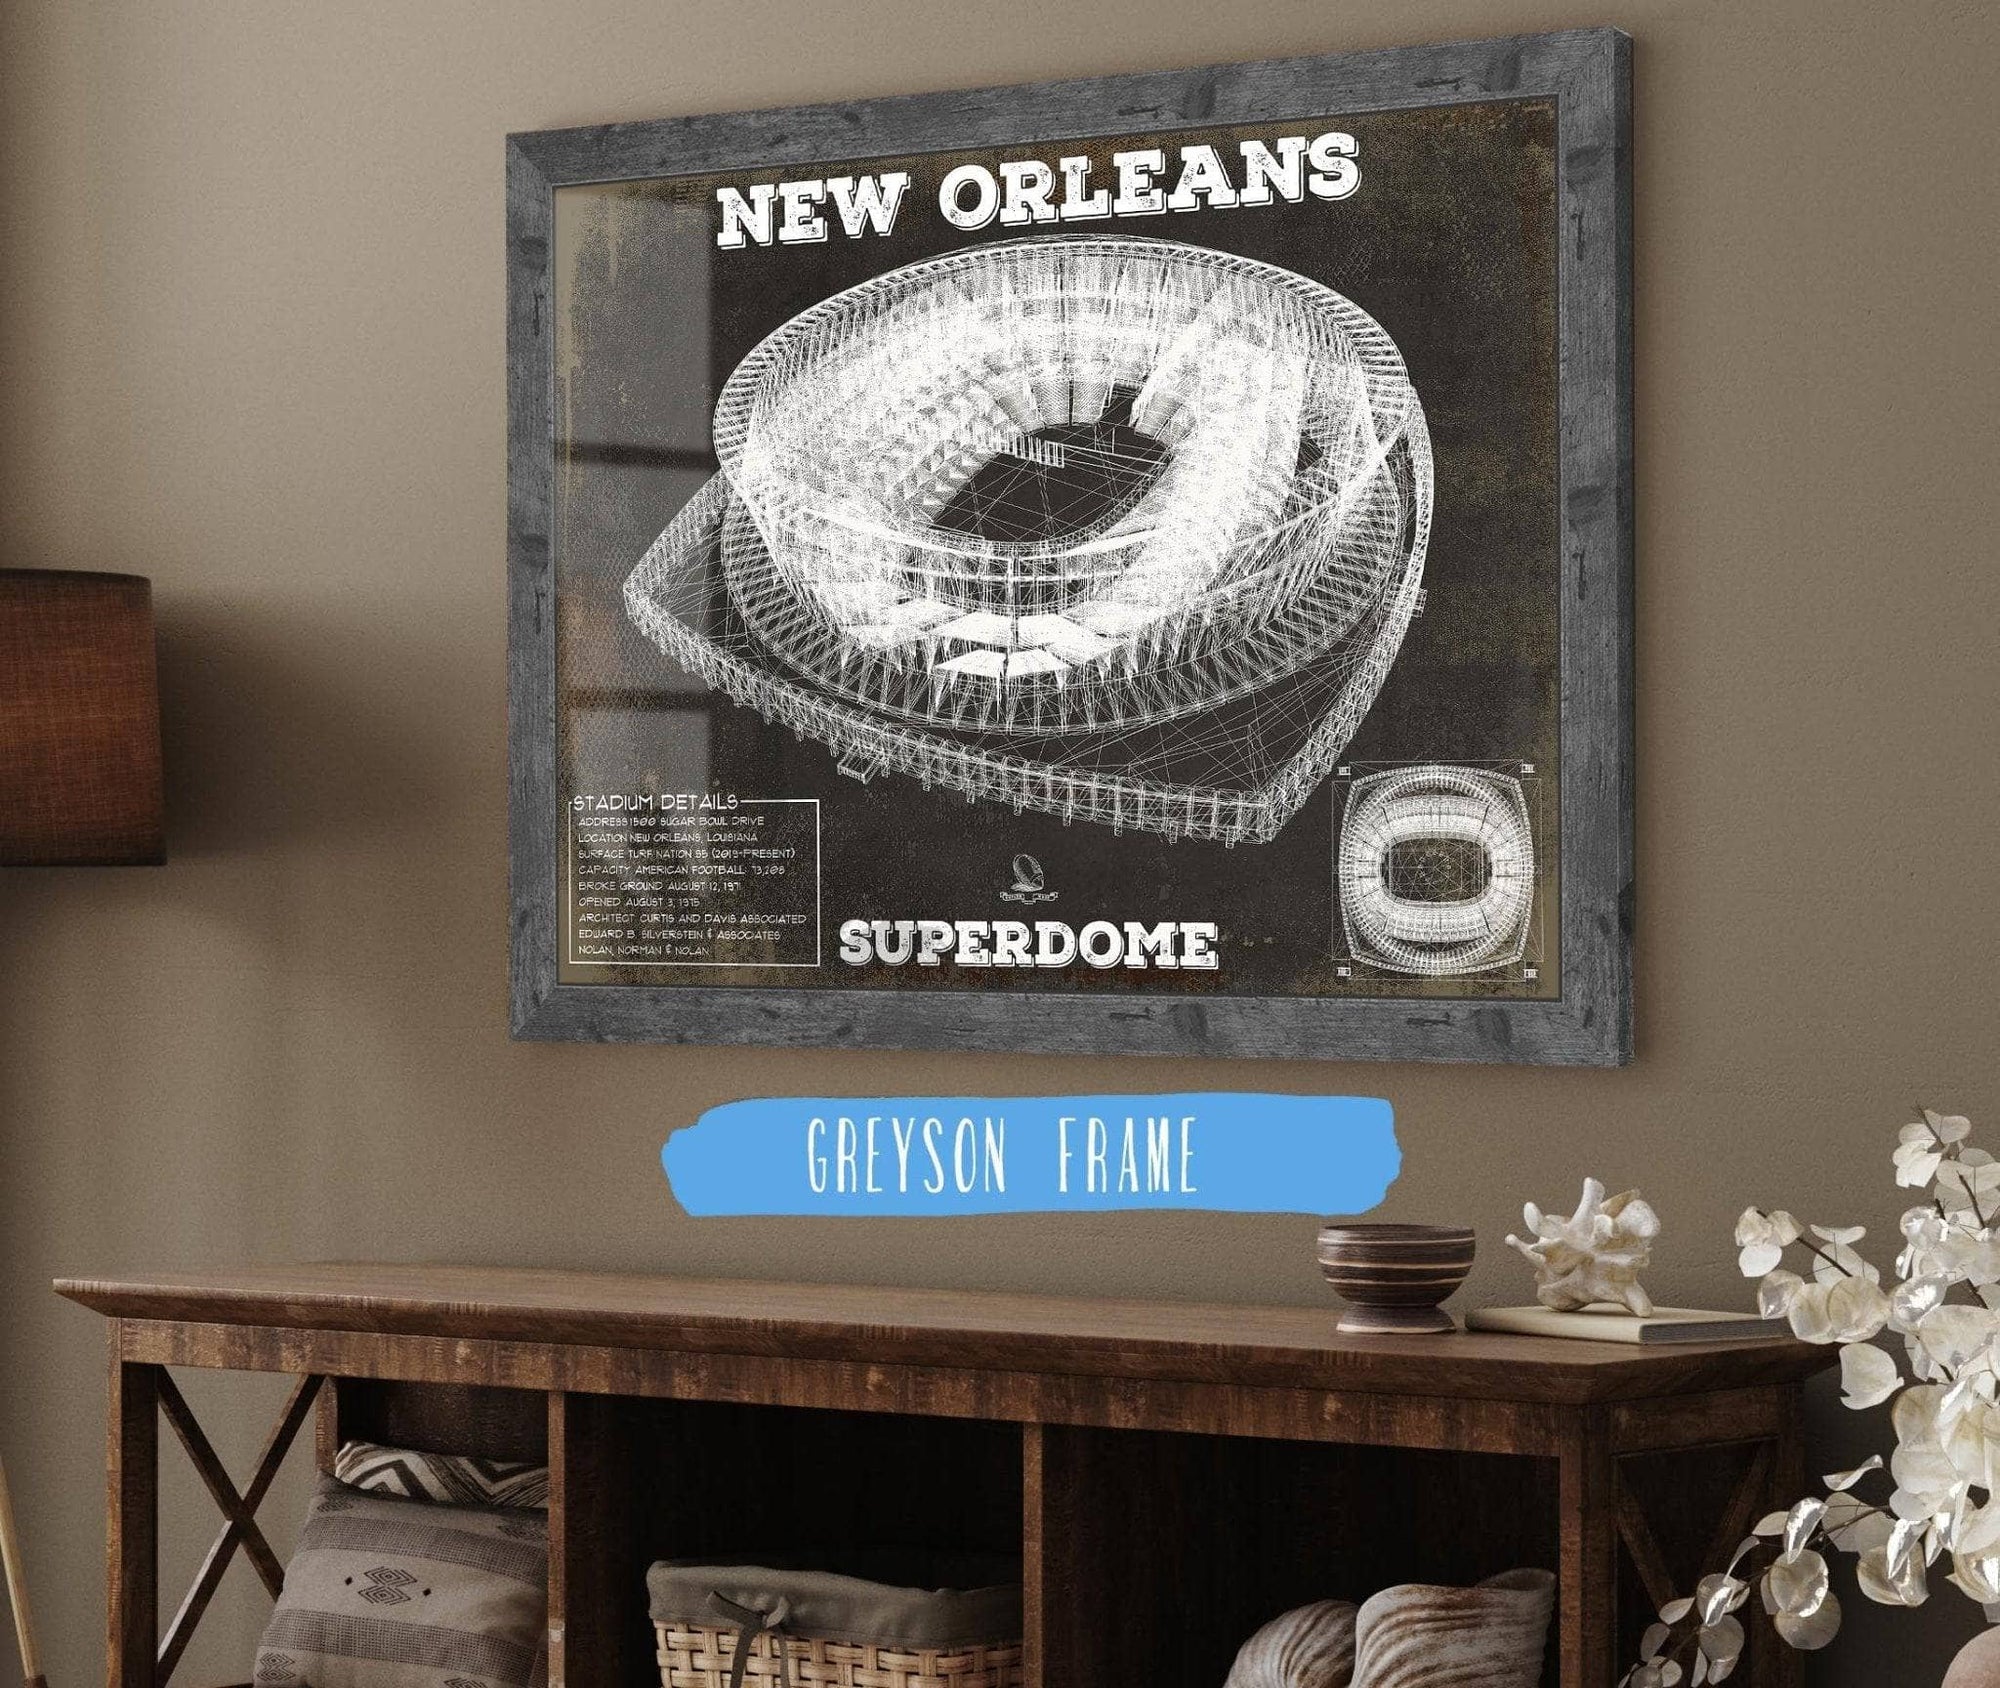 Cutler West Pro Football Collection 14" x 11" / Greyson Frame New Orleans Saints Superdome Seating Chart - Vintage Football Print 734084112-TOP